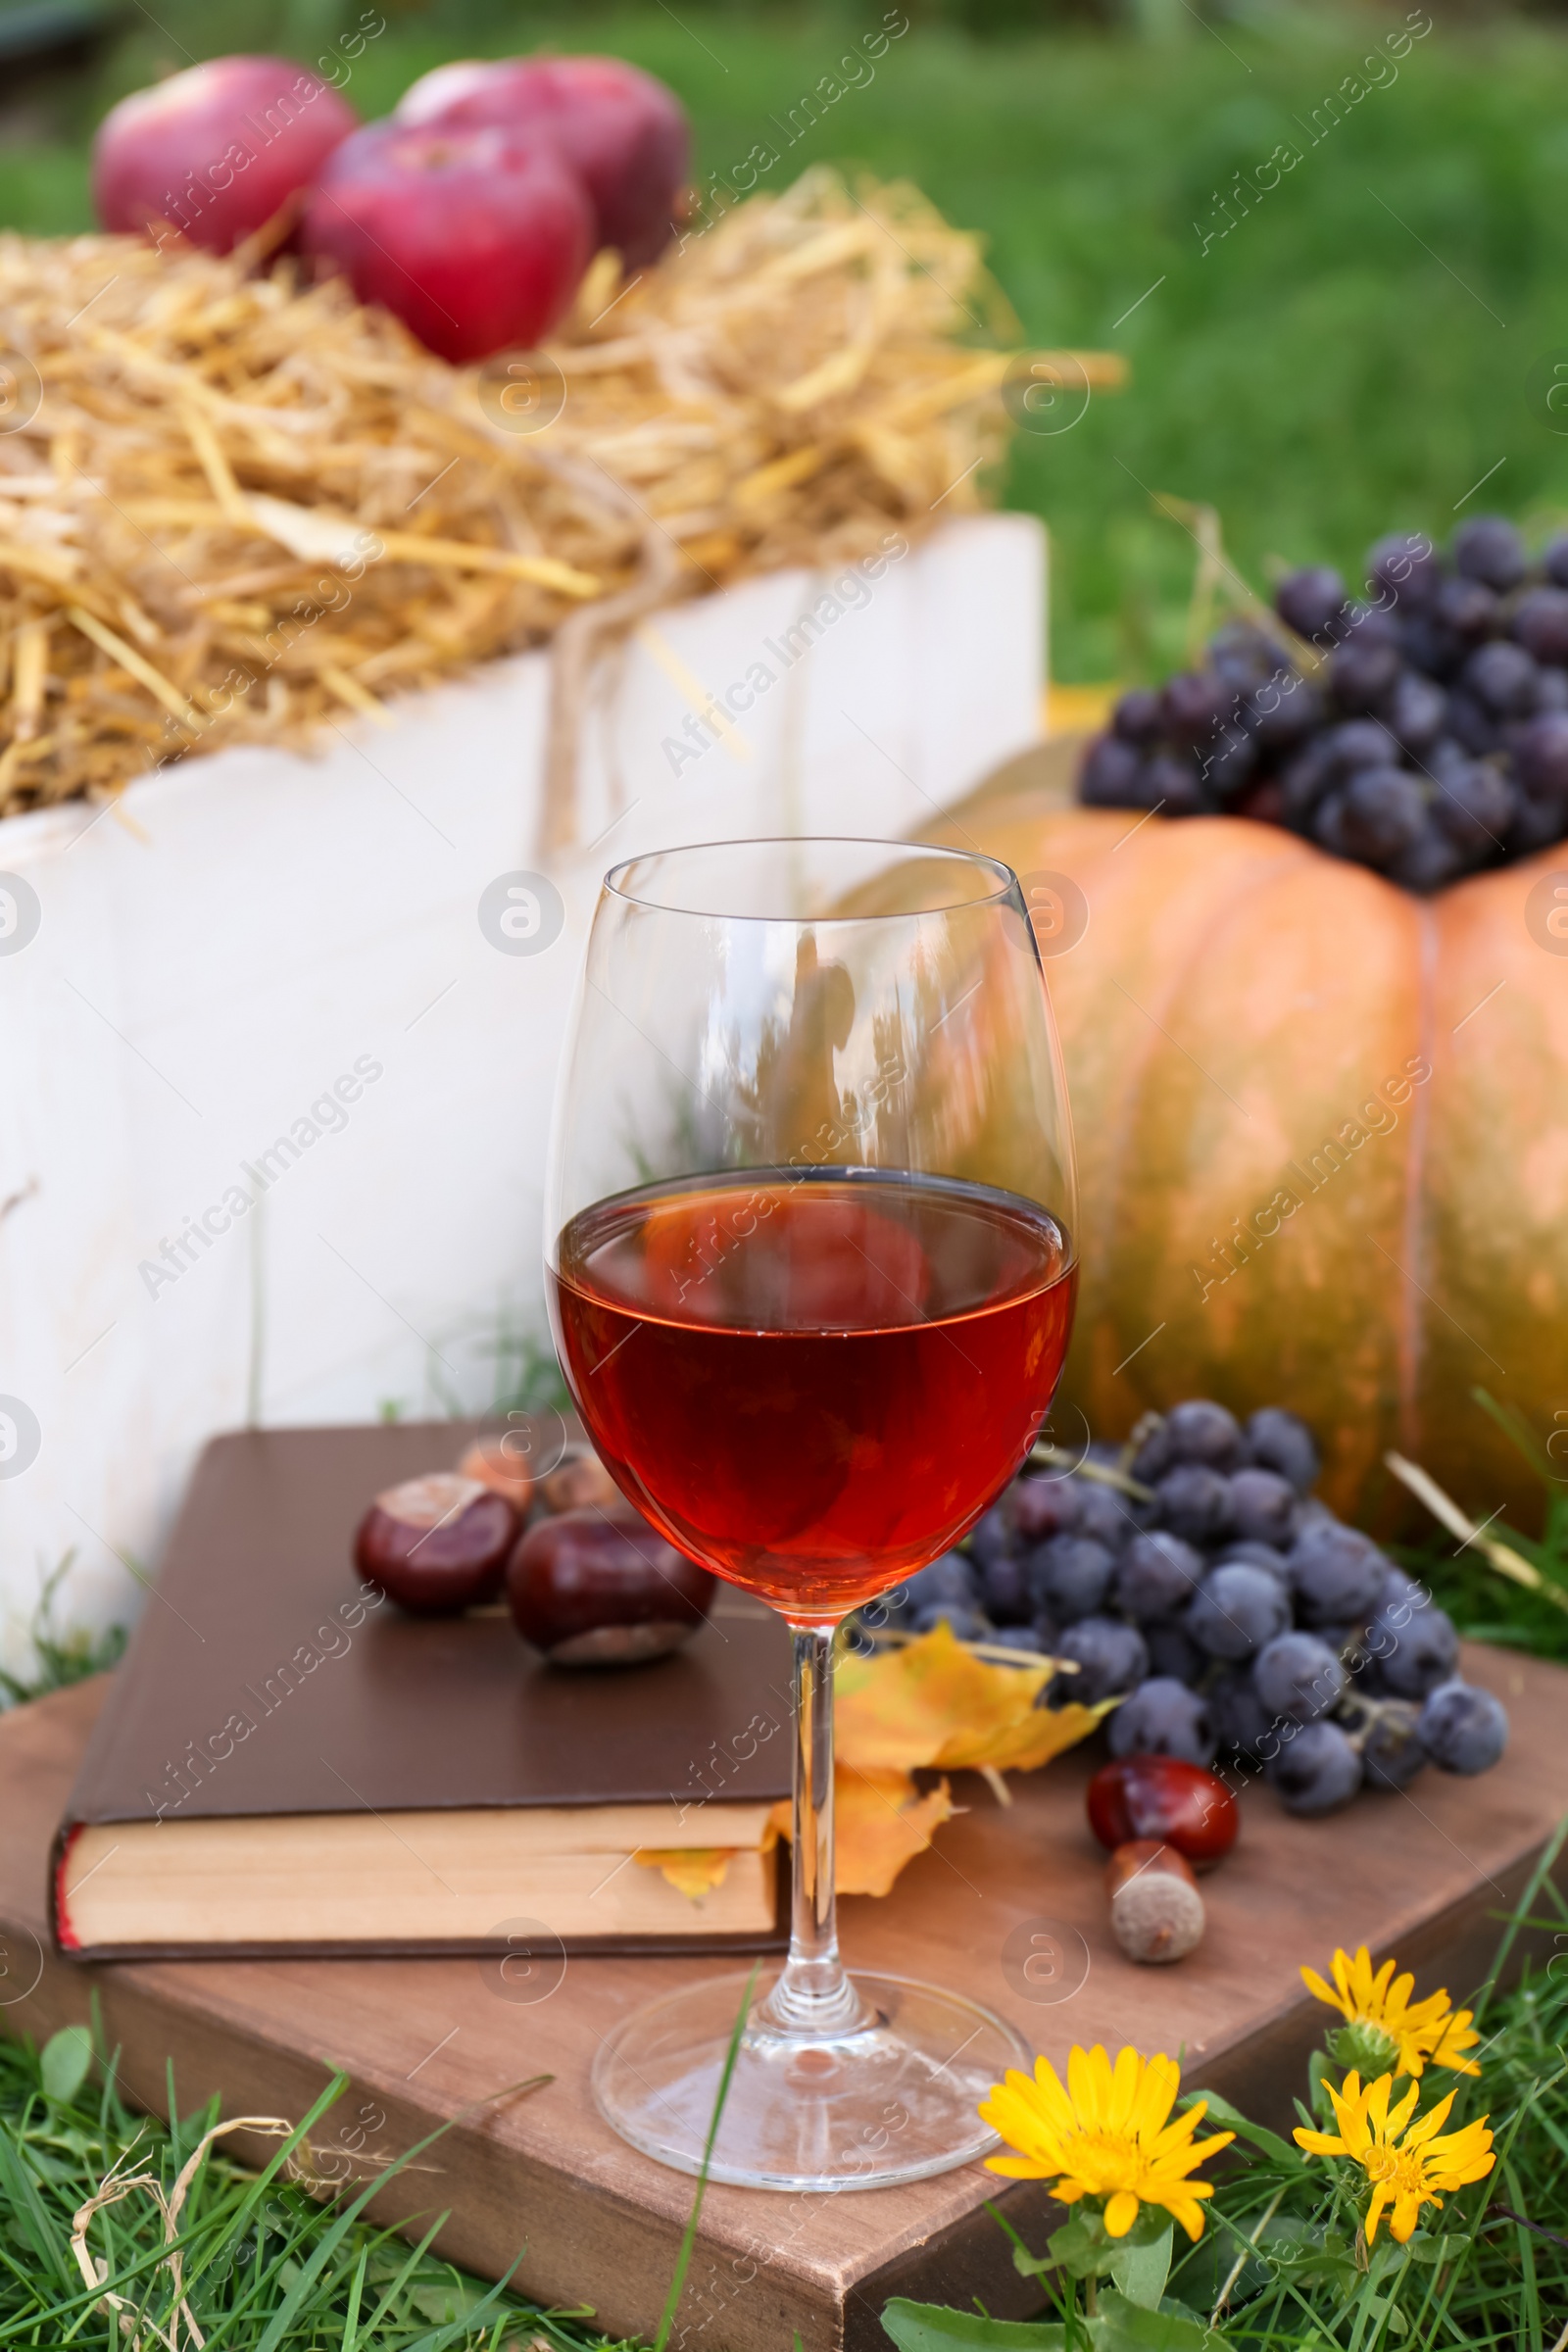 Photo of Glass of wine, book, pumpkin and grapes on green grass outdoors. Autumn picnic